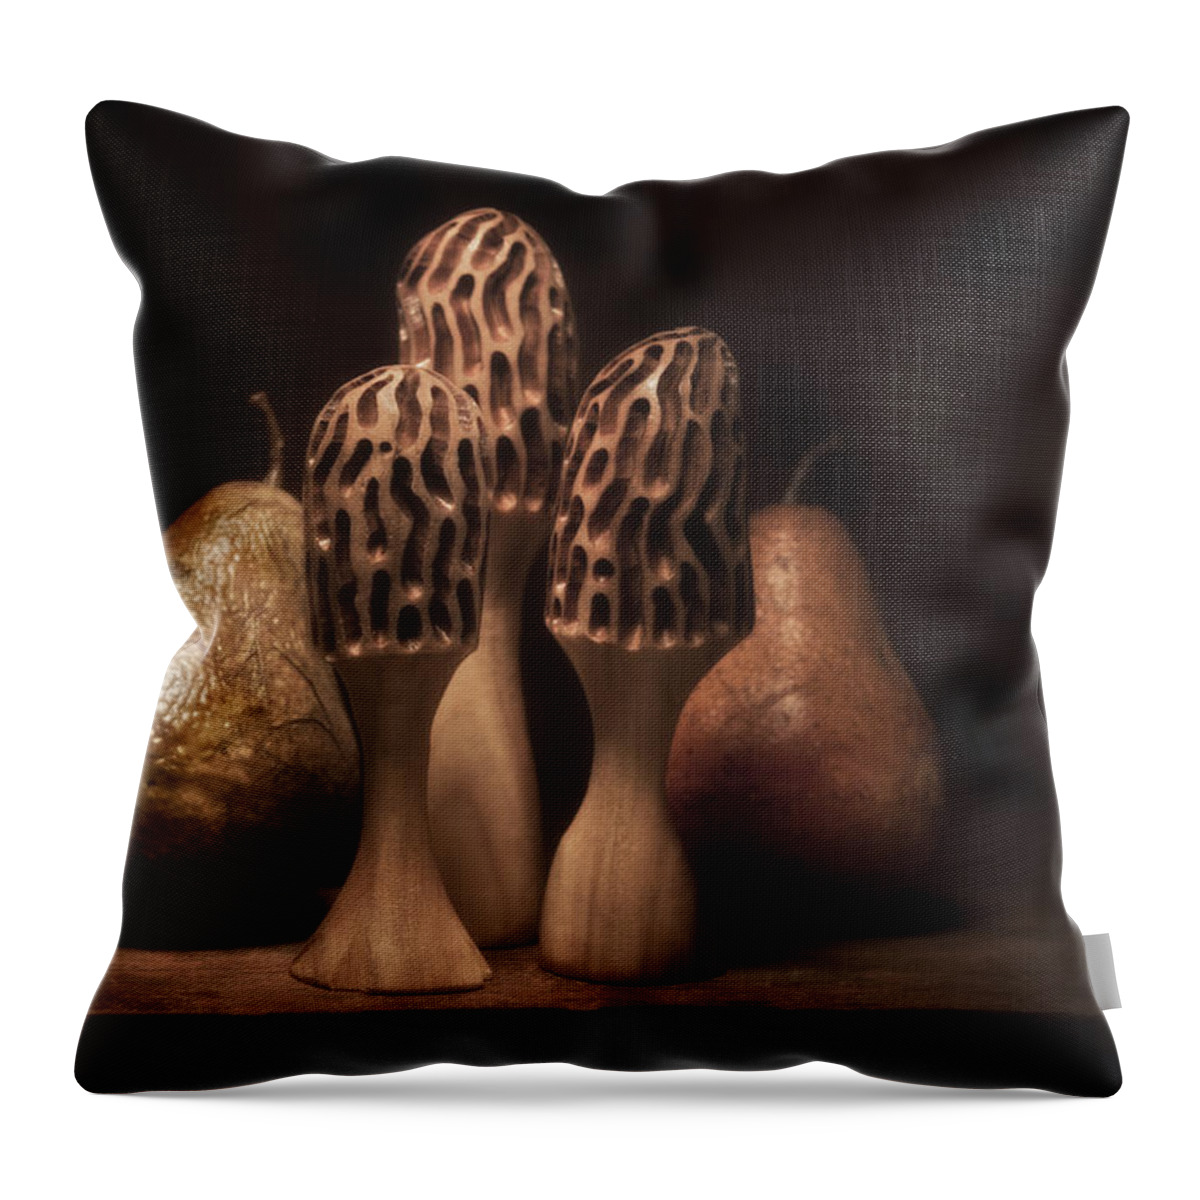 Mushroom Throw Pillow featuring the photograph Still Life with Mushrooms and Pears I by Tom Mc Nemar